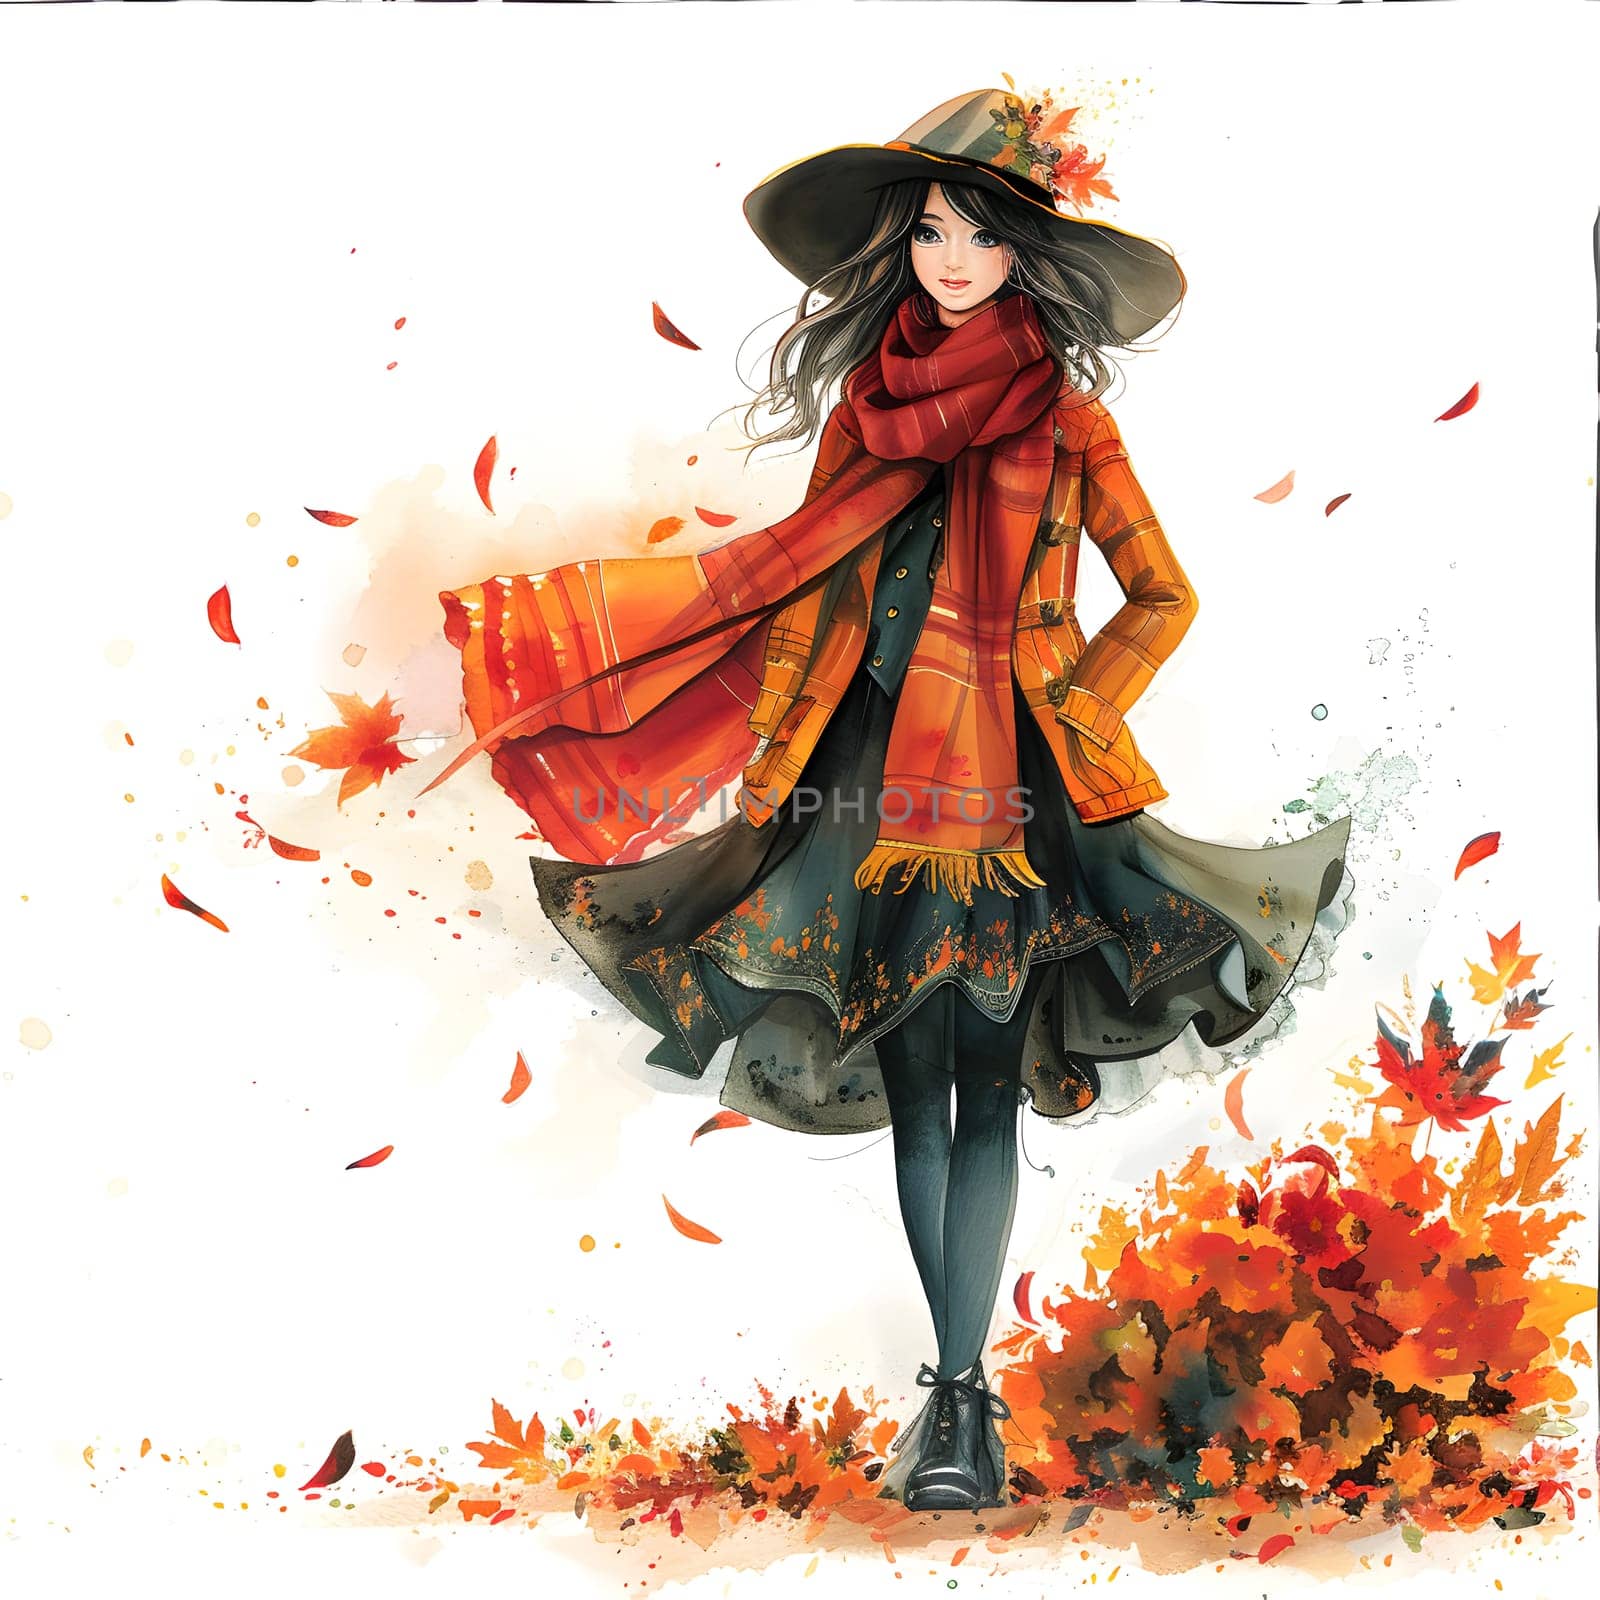 An artist in a stylish orange hat and textile scarf is painting a beautiful illustration of a field of leaves, blending art and fashion design